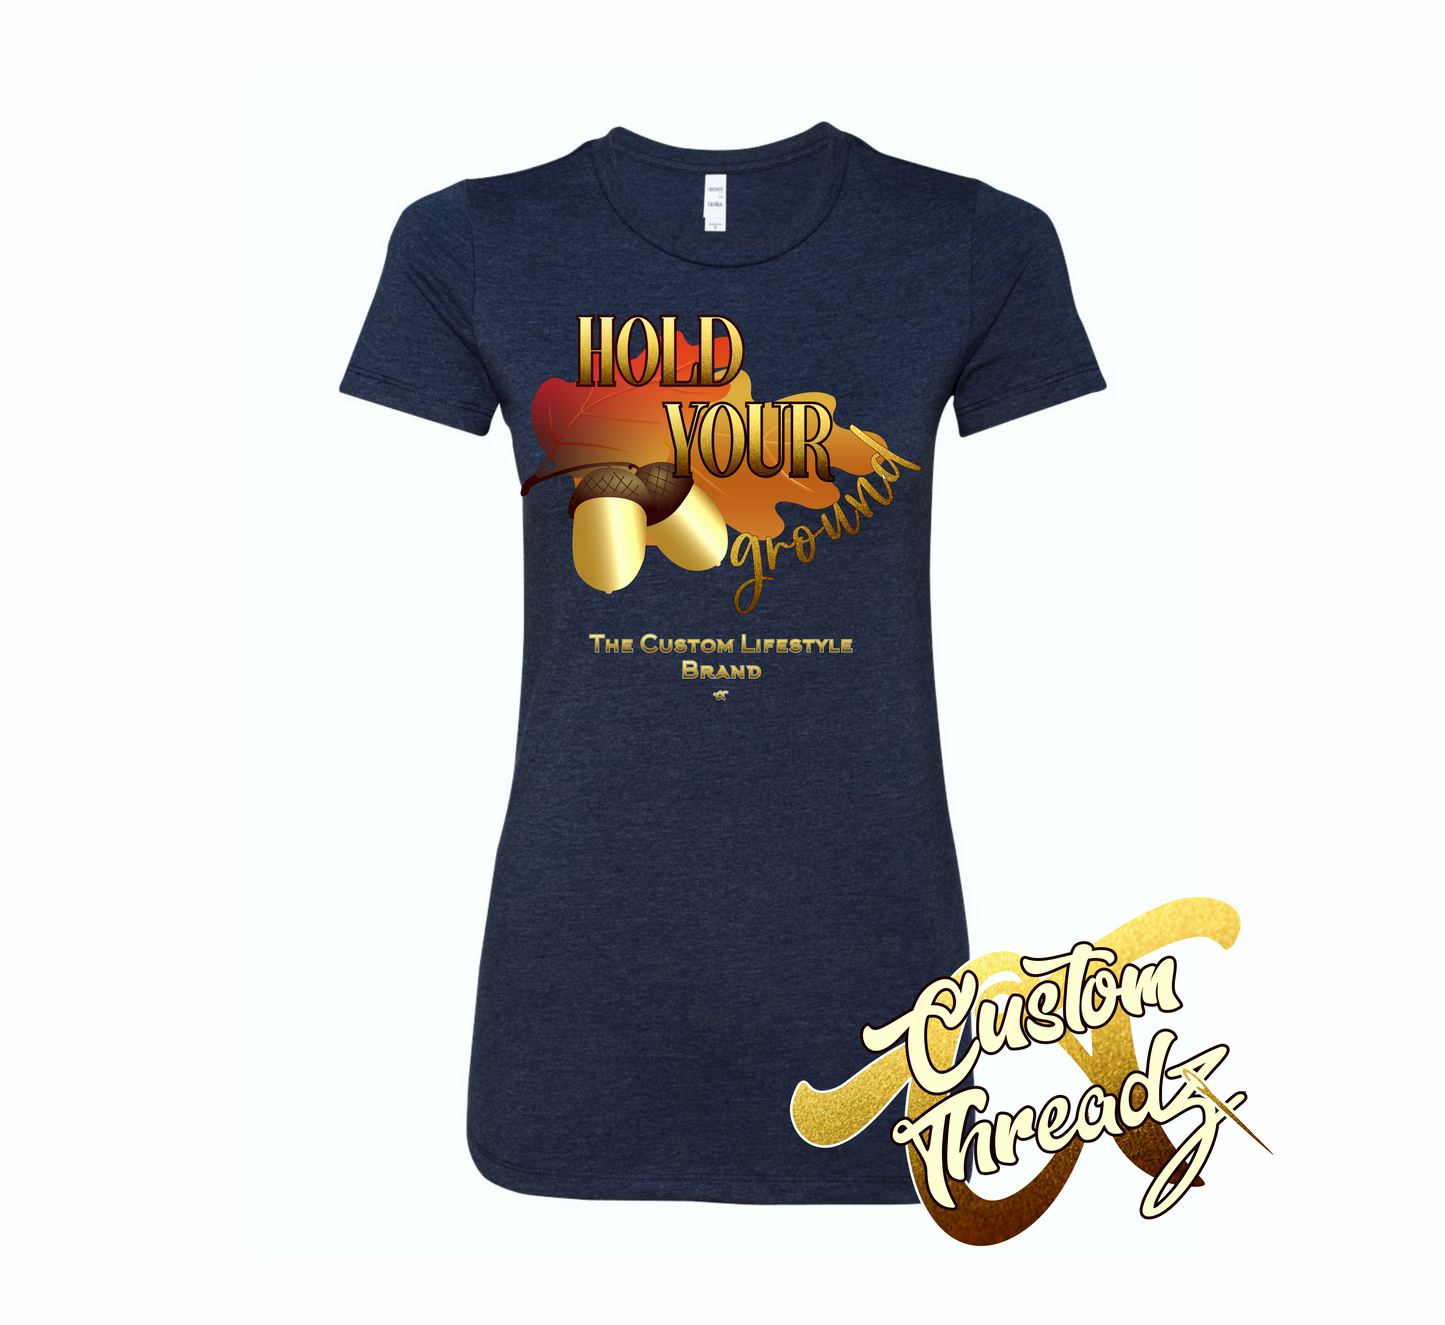 navy womens tee with hold your ground fall autumn DTG printed design